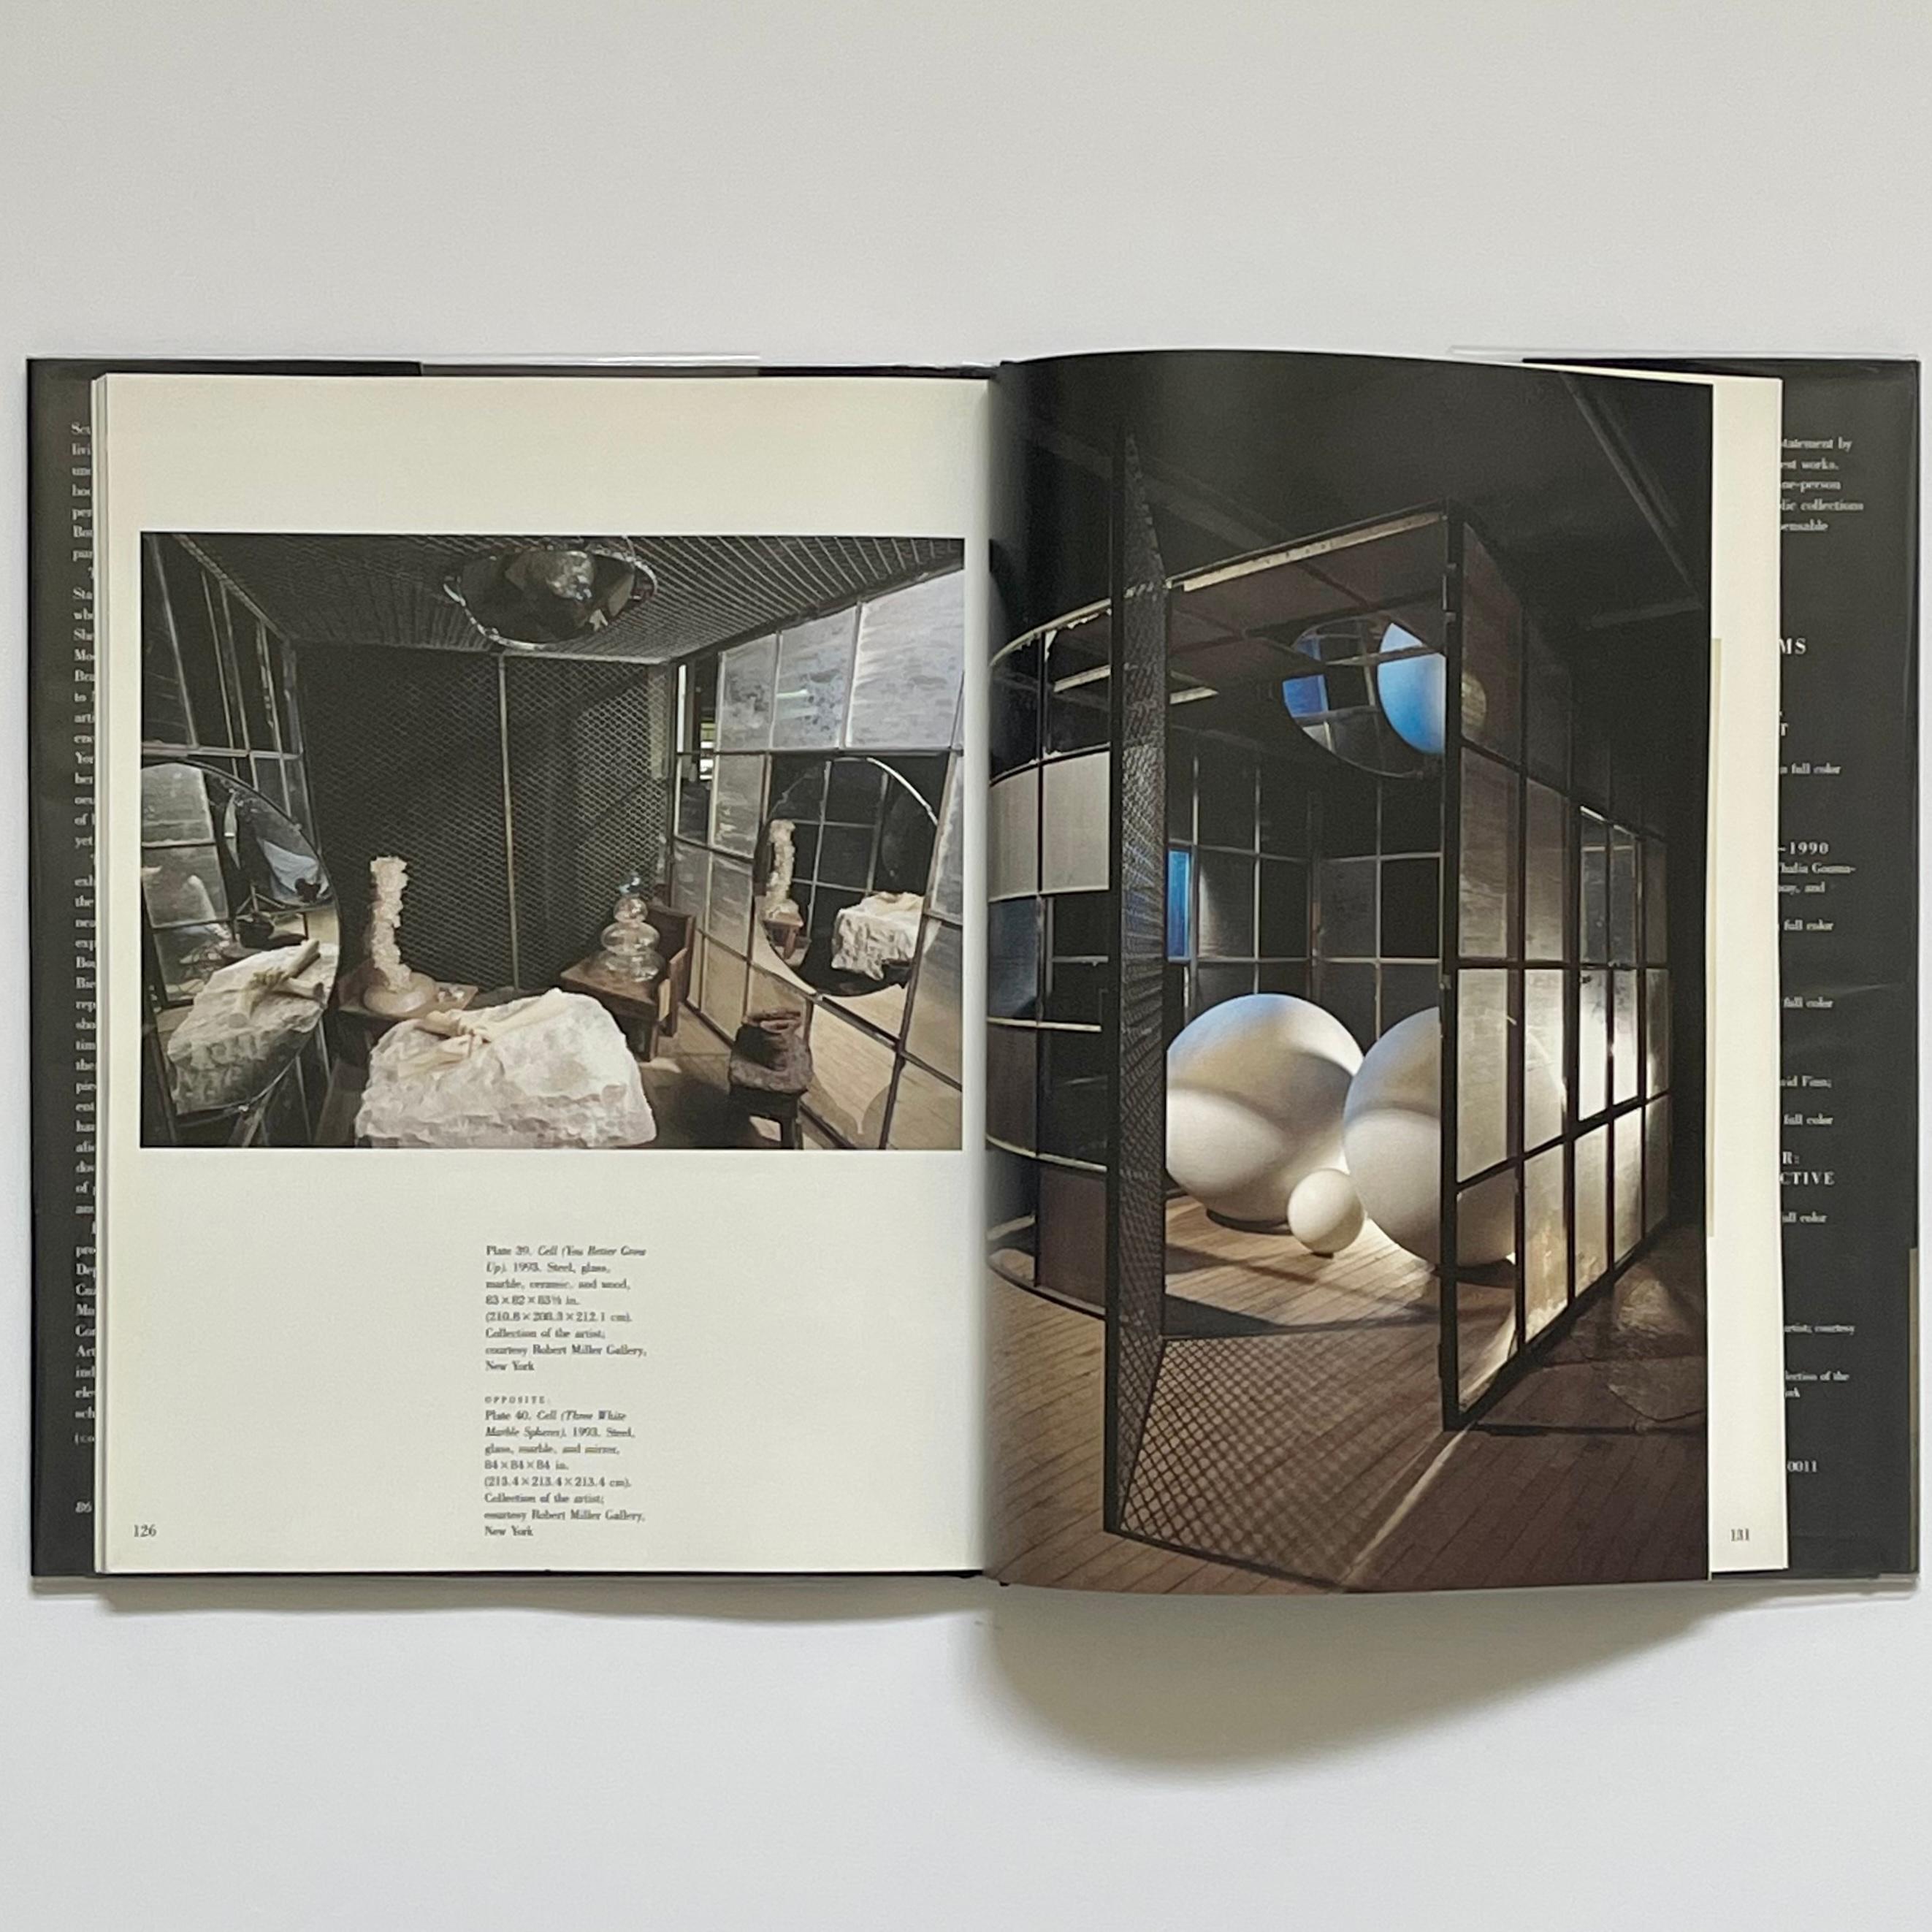 Louise Bourgeois - The Locus Of Memory, Works 1982-1993
Published by The Brooklyn Museum/Abrams, 1994

Sculptor Louise Bourgeois is one of the foremost artists of the 20th century and her legacy is central to the understanding of modern art. This